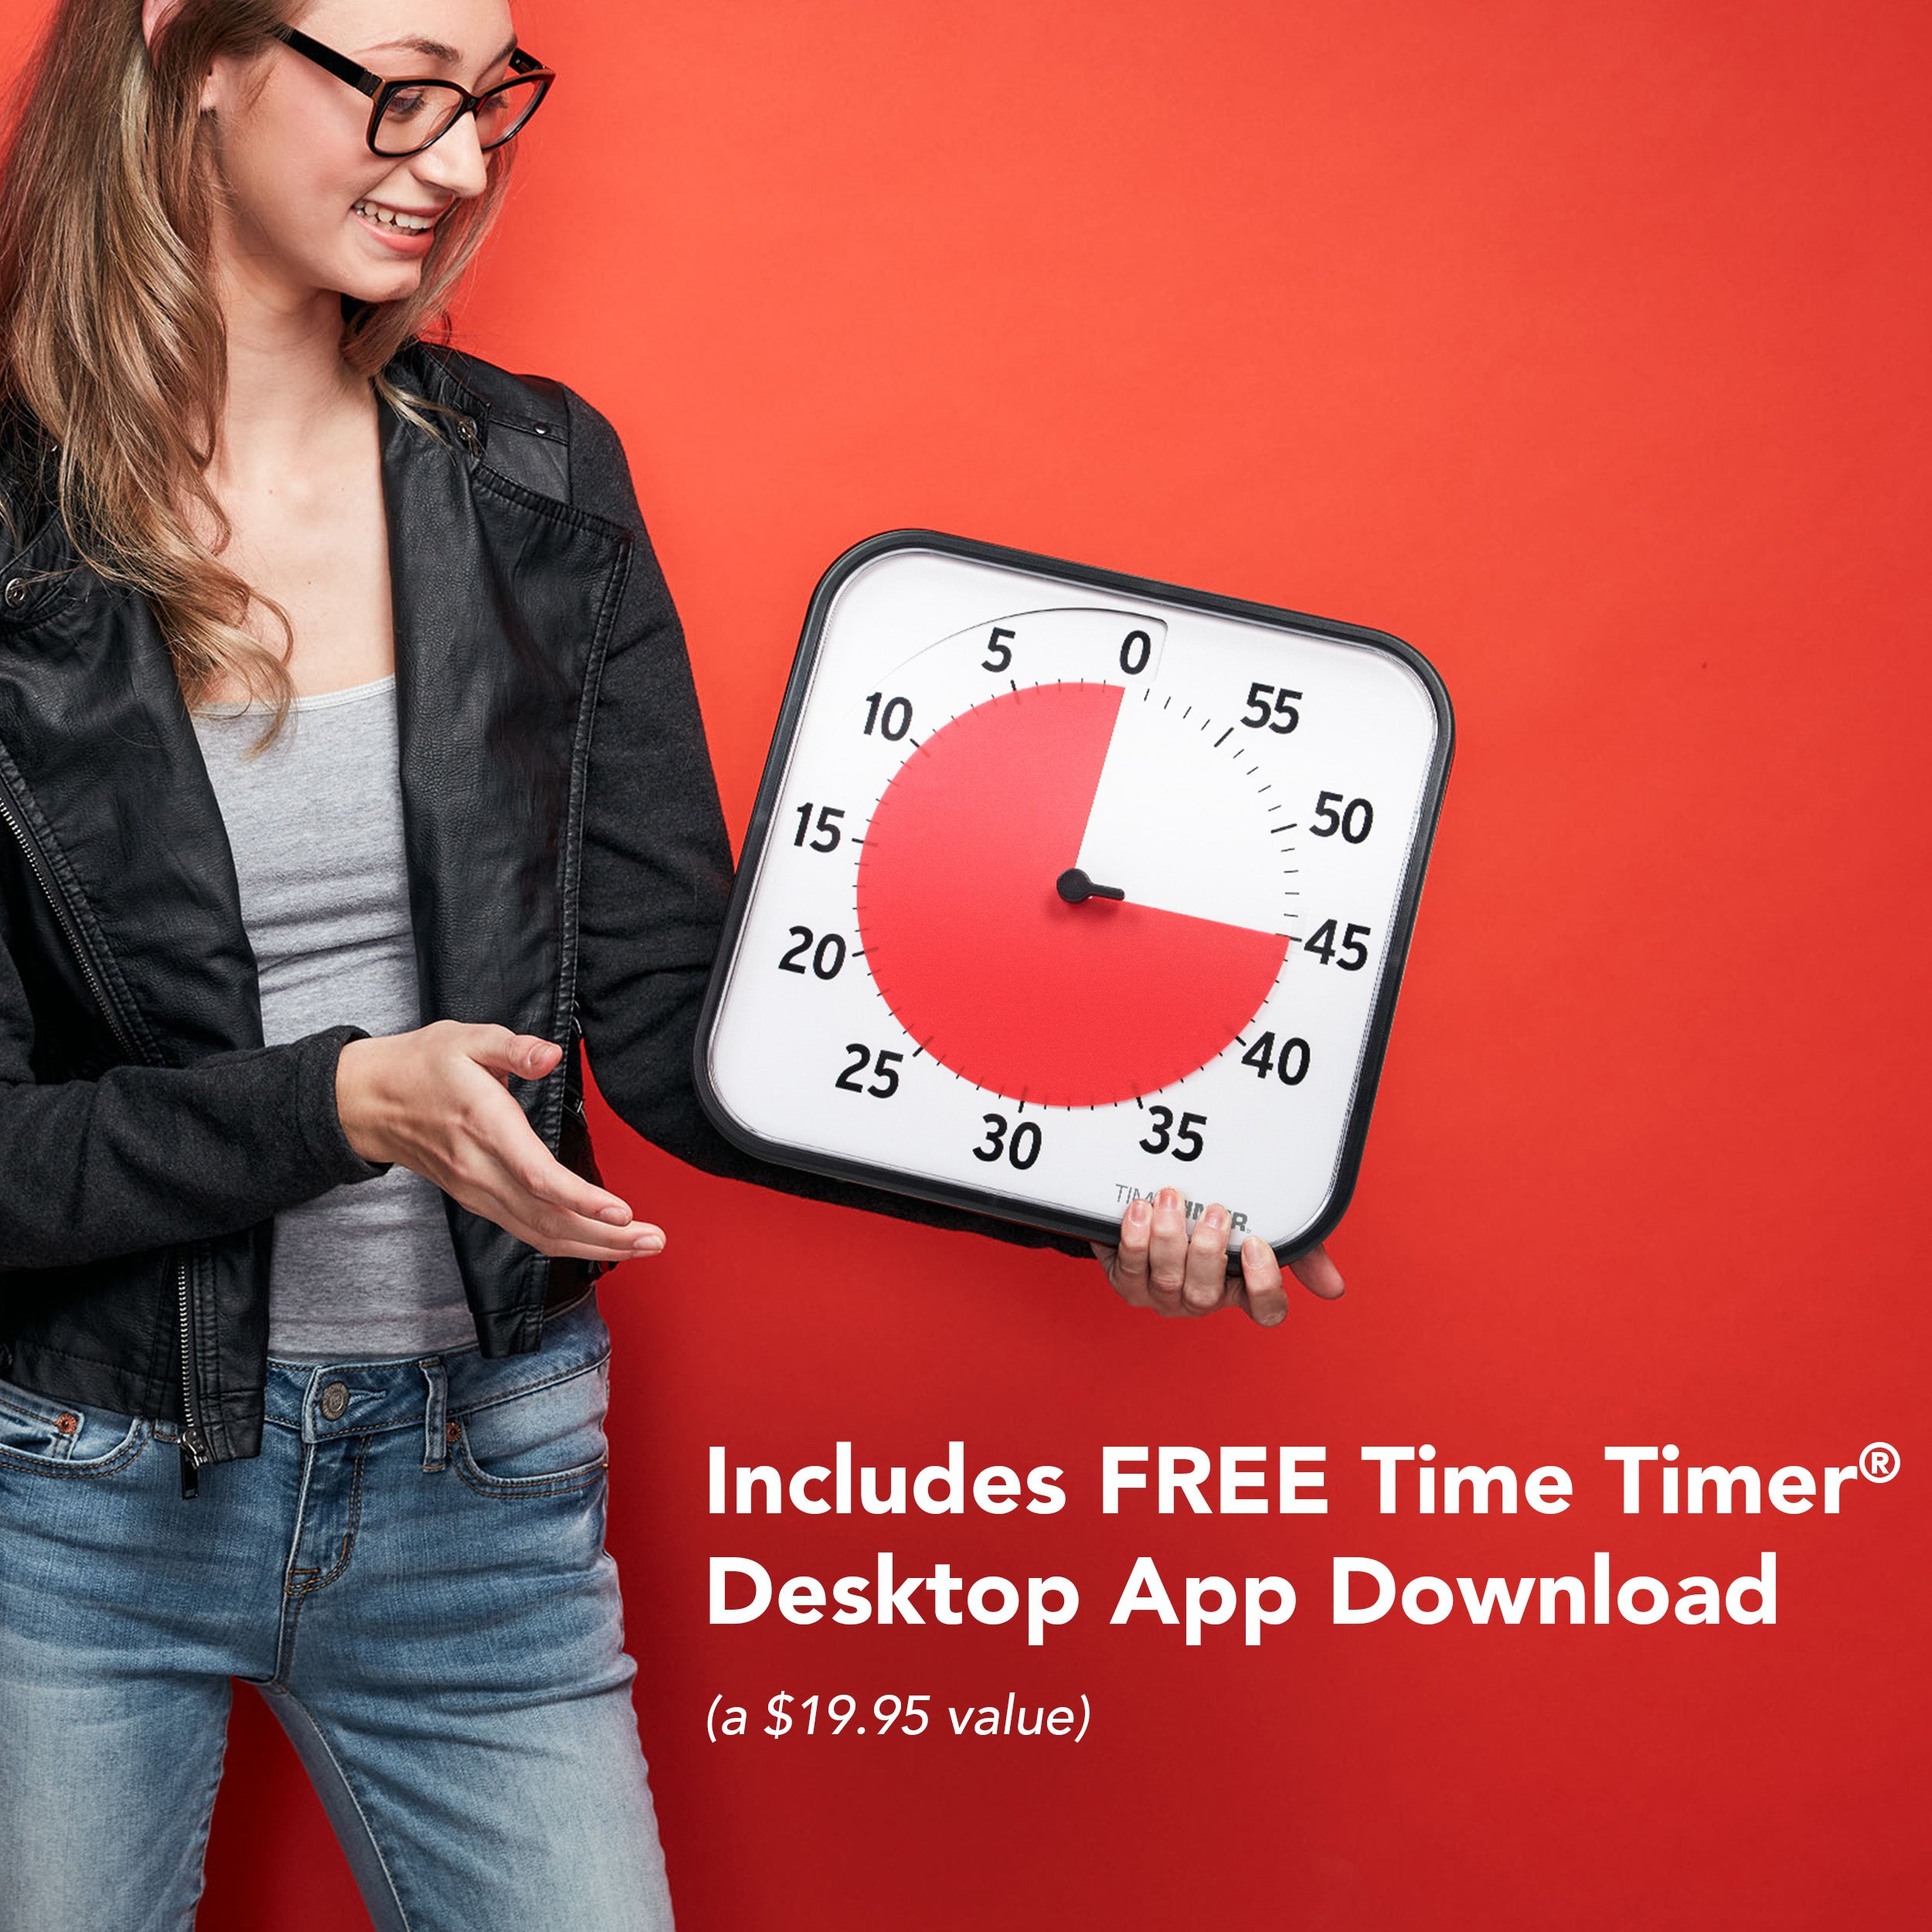 The Time Timer Original 12" is being held by a young woman to showcase the size. This product includes a FREE Time Timer Desktop App Download, a $19.95 retail value.